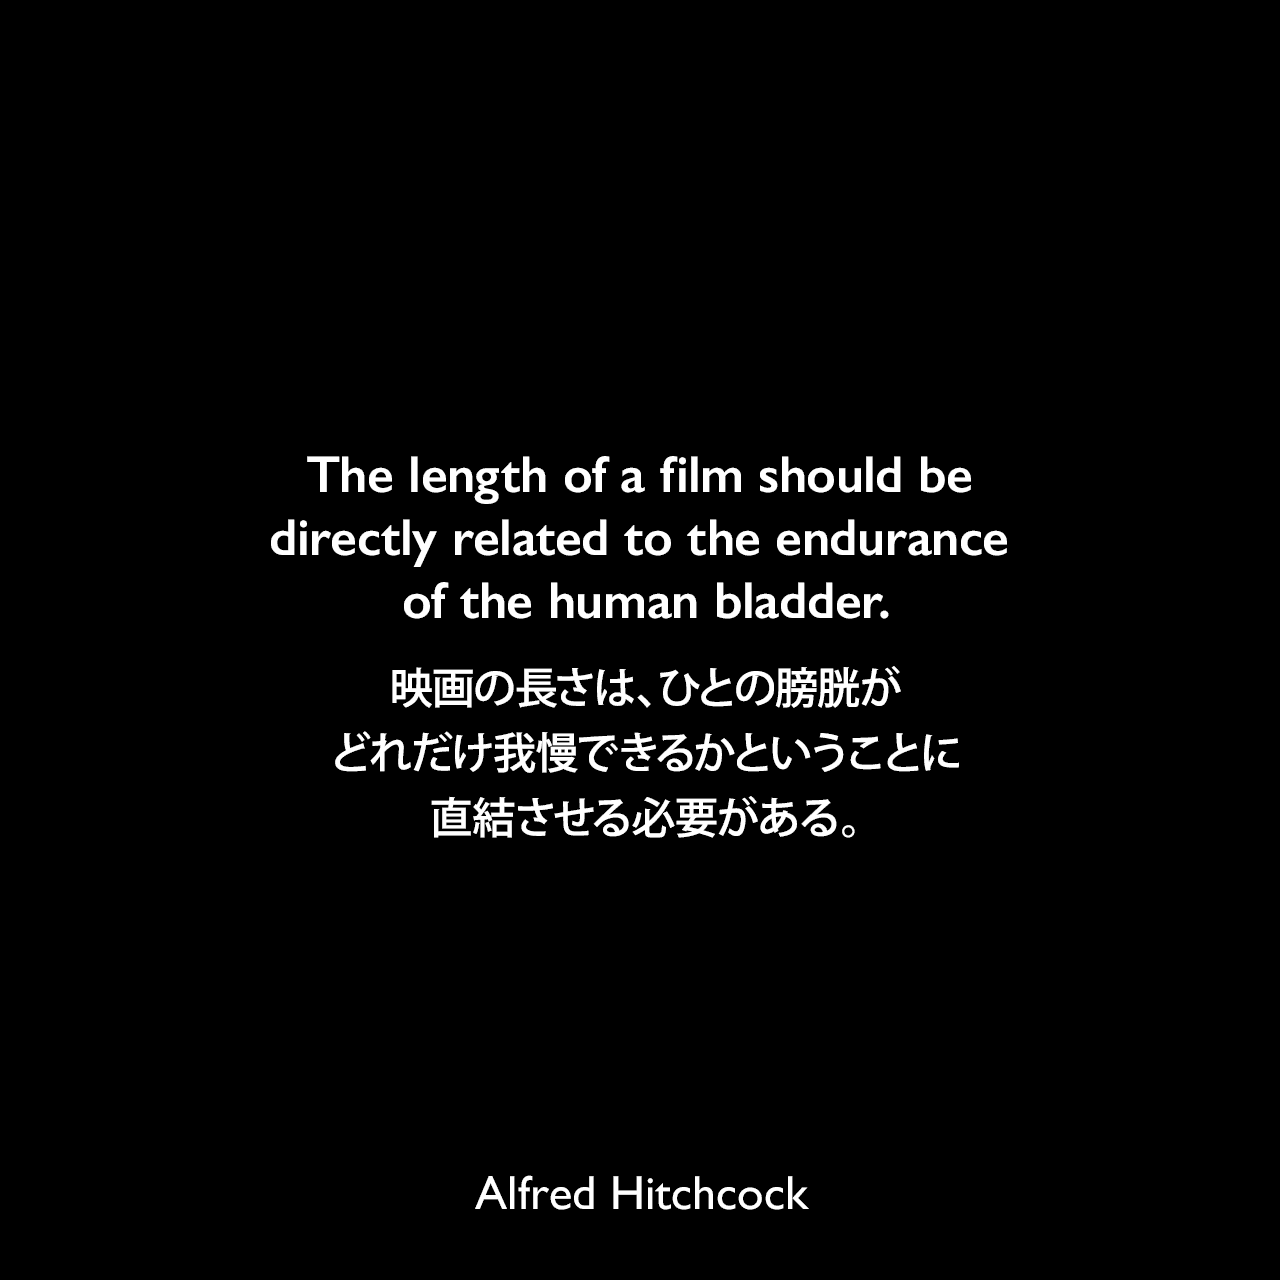 The length of a film should be directly related to the endurance of the human bladder.映画の長さは、ひとの膀胱がどれだけ我慢できるかということに直結させる必要がある。Alfred Hitchcock